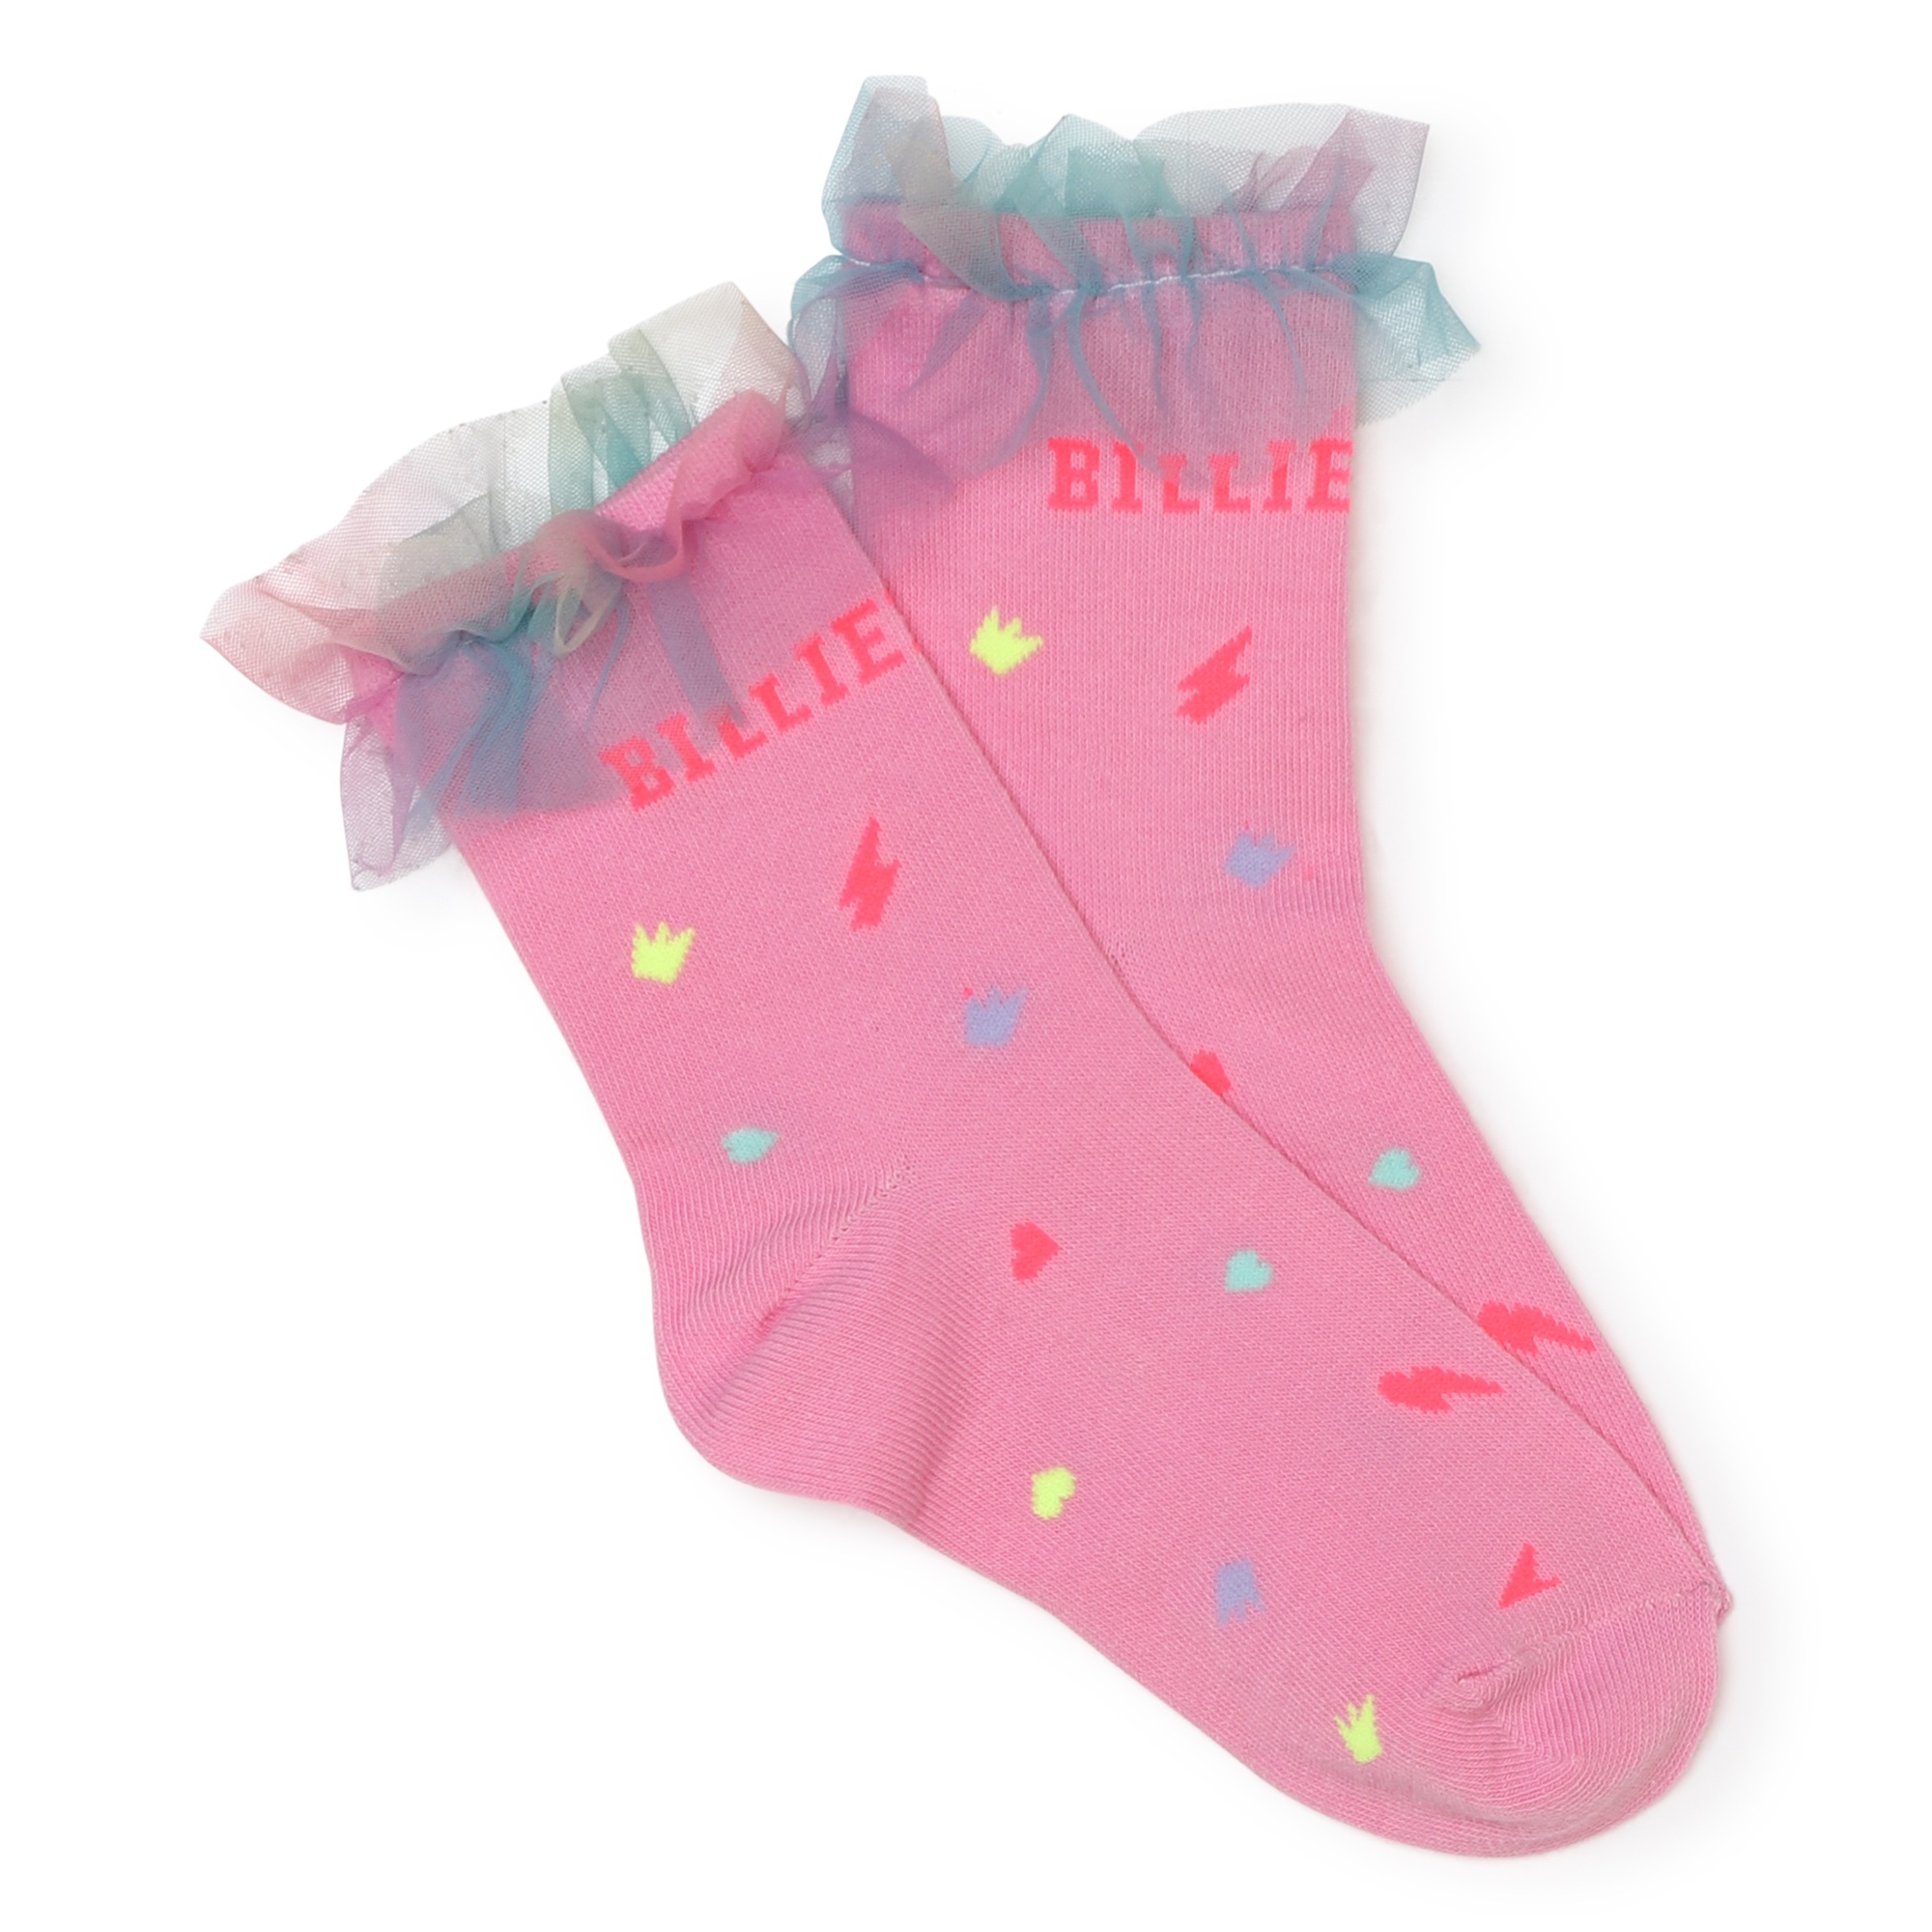 Printed socks with frill BILLIEBLUSH for GIRL